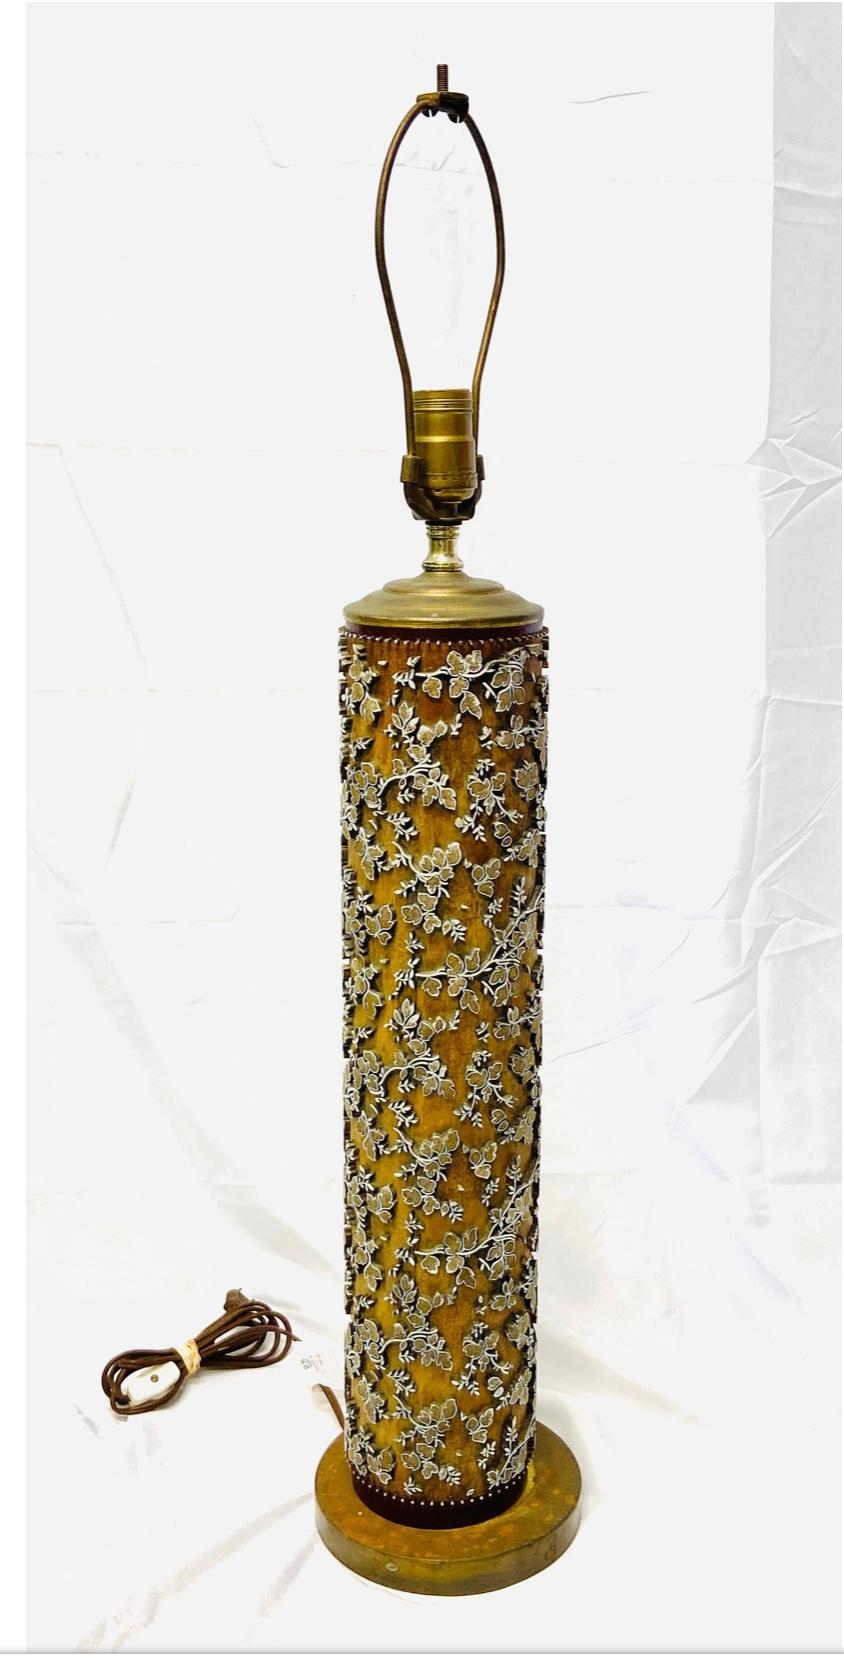 Unique wooden vintage printing roll table lamp. Made from vintage wallpaper printing roll. Brown in color with small swirling leaf motif. In the original finish and in working order. Metal base. No shades.